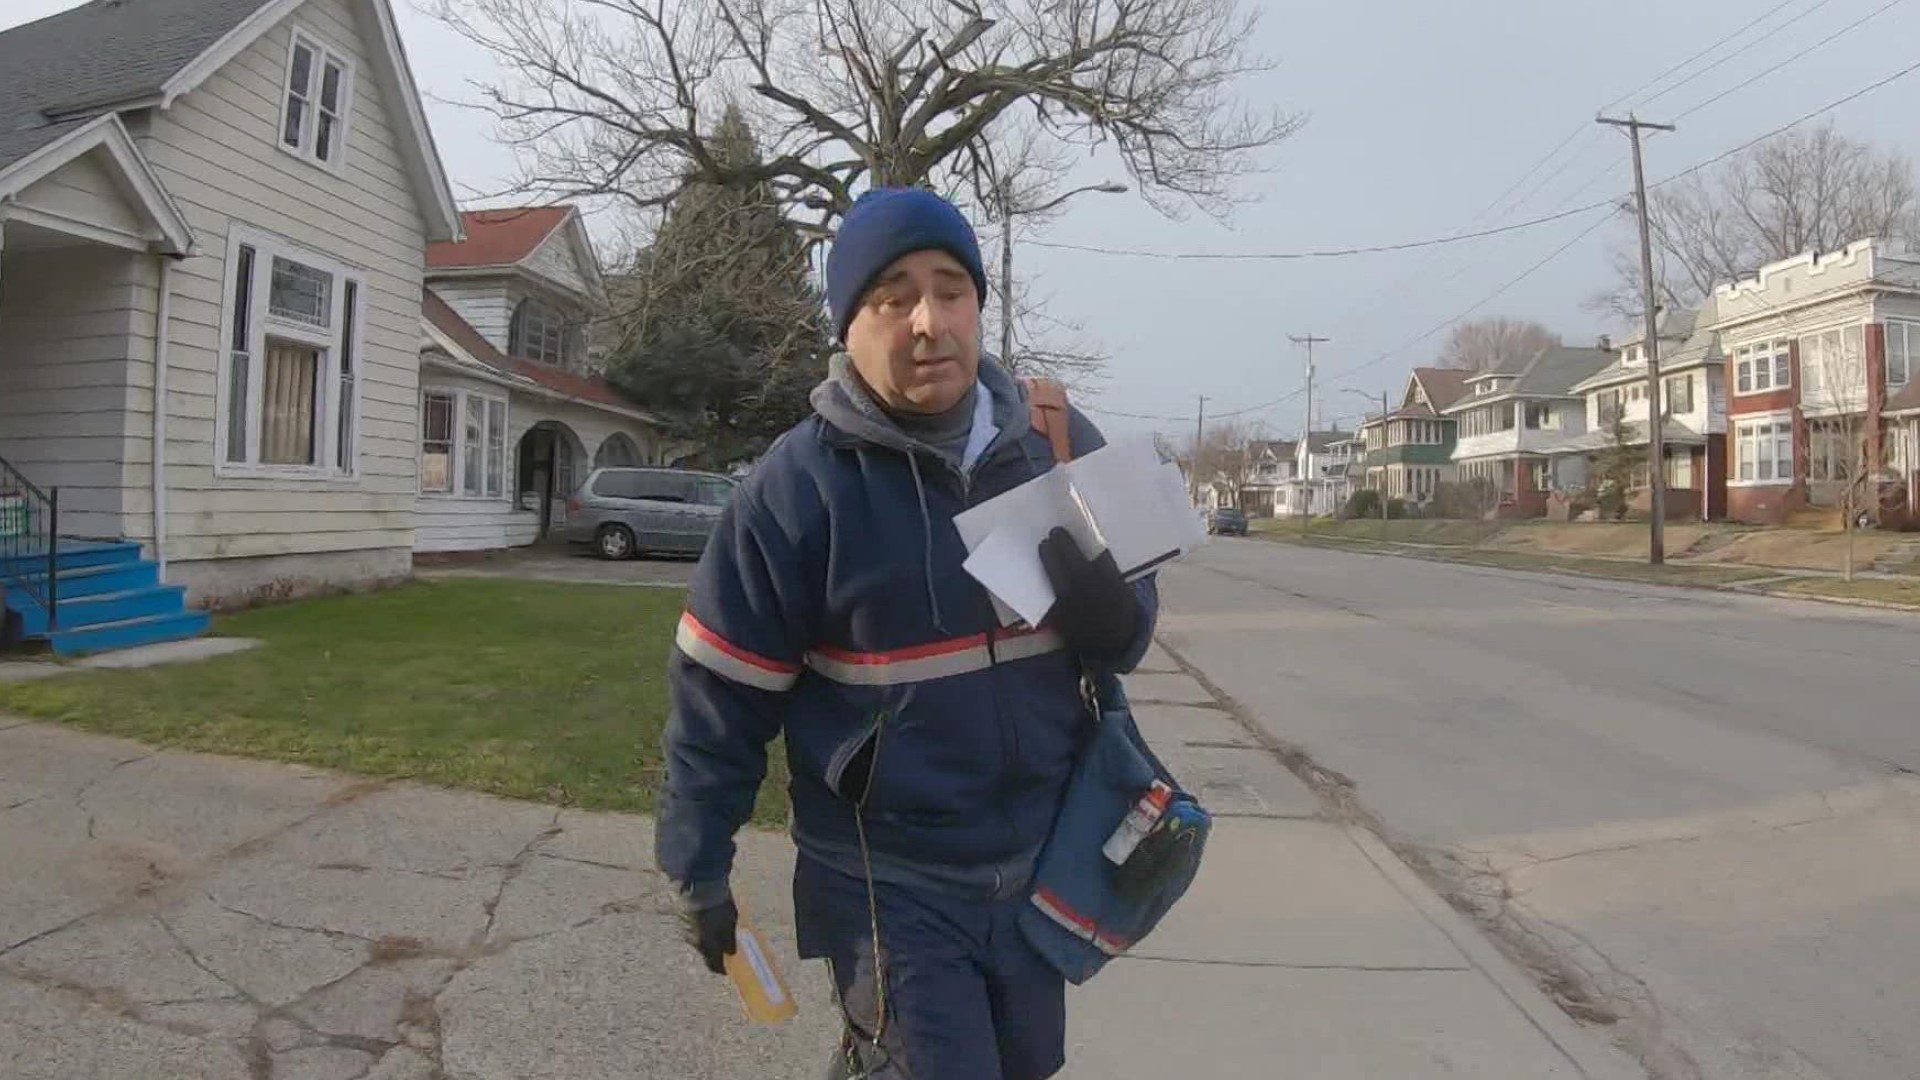 It was a normal Monday for Toledo USPS mail carrier Jeff Alexander until he reached a longtime resident on his route in desperate need of help.